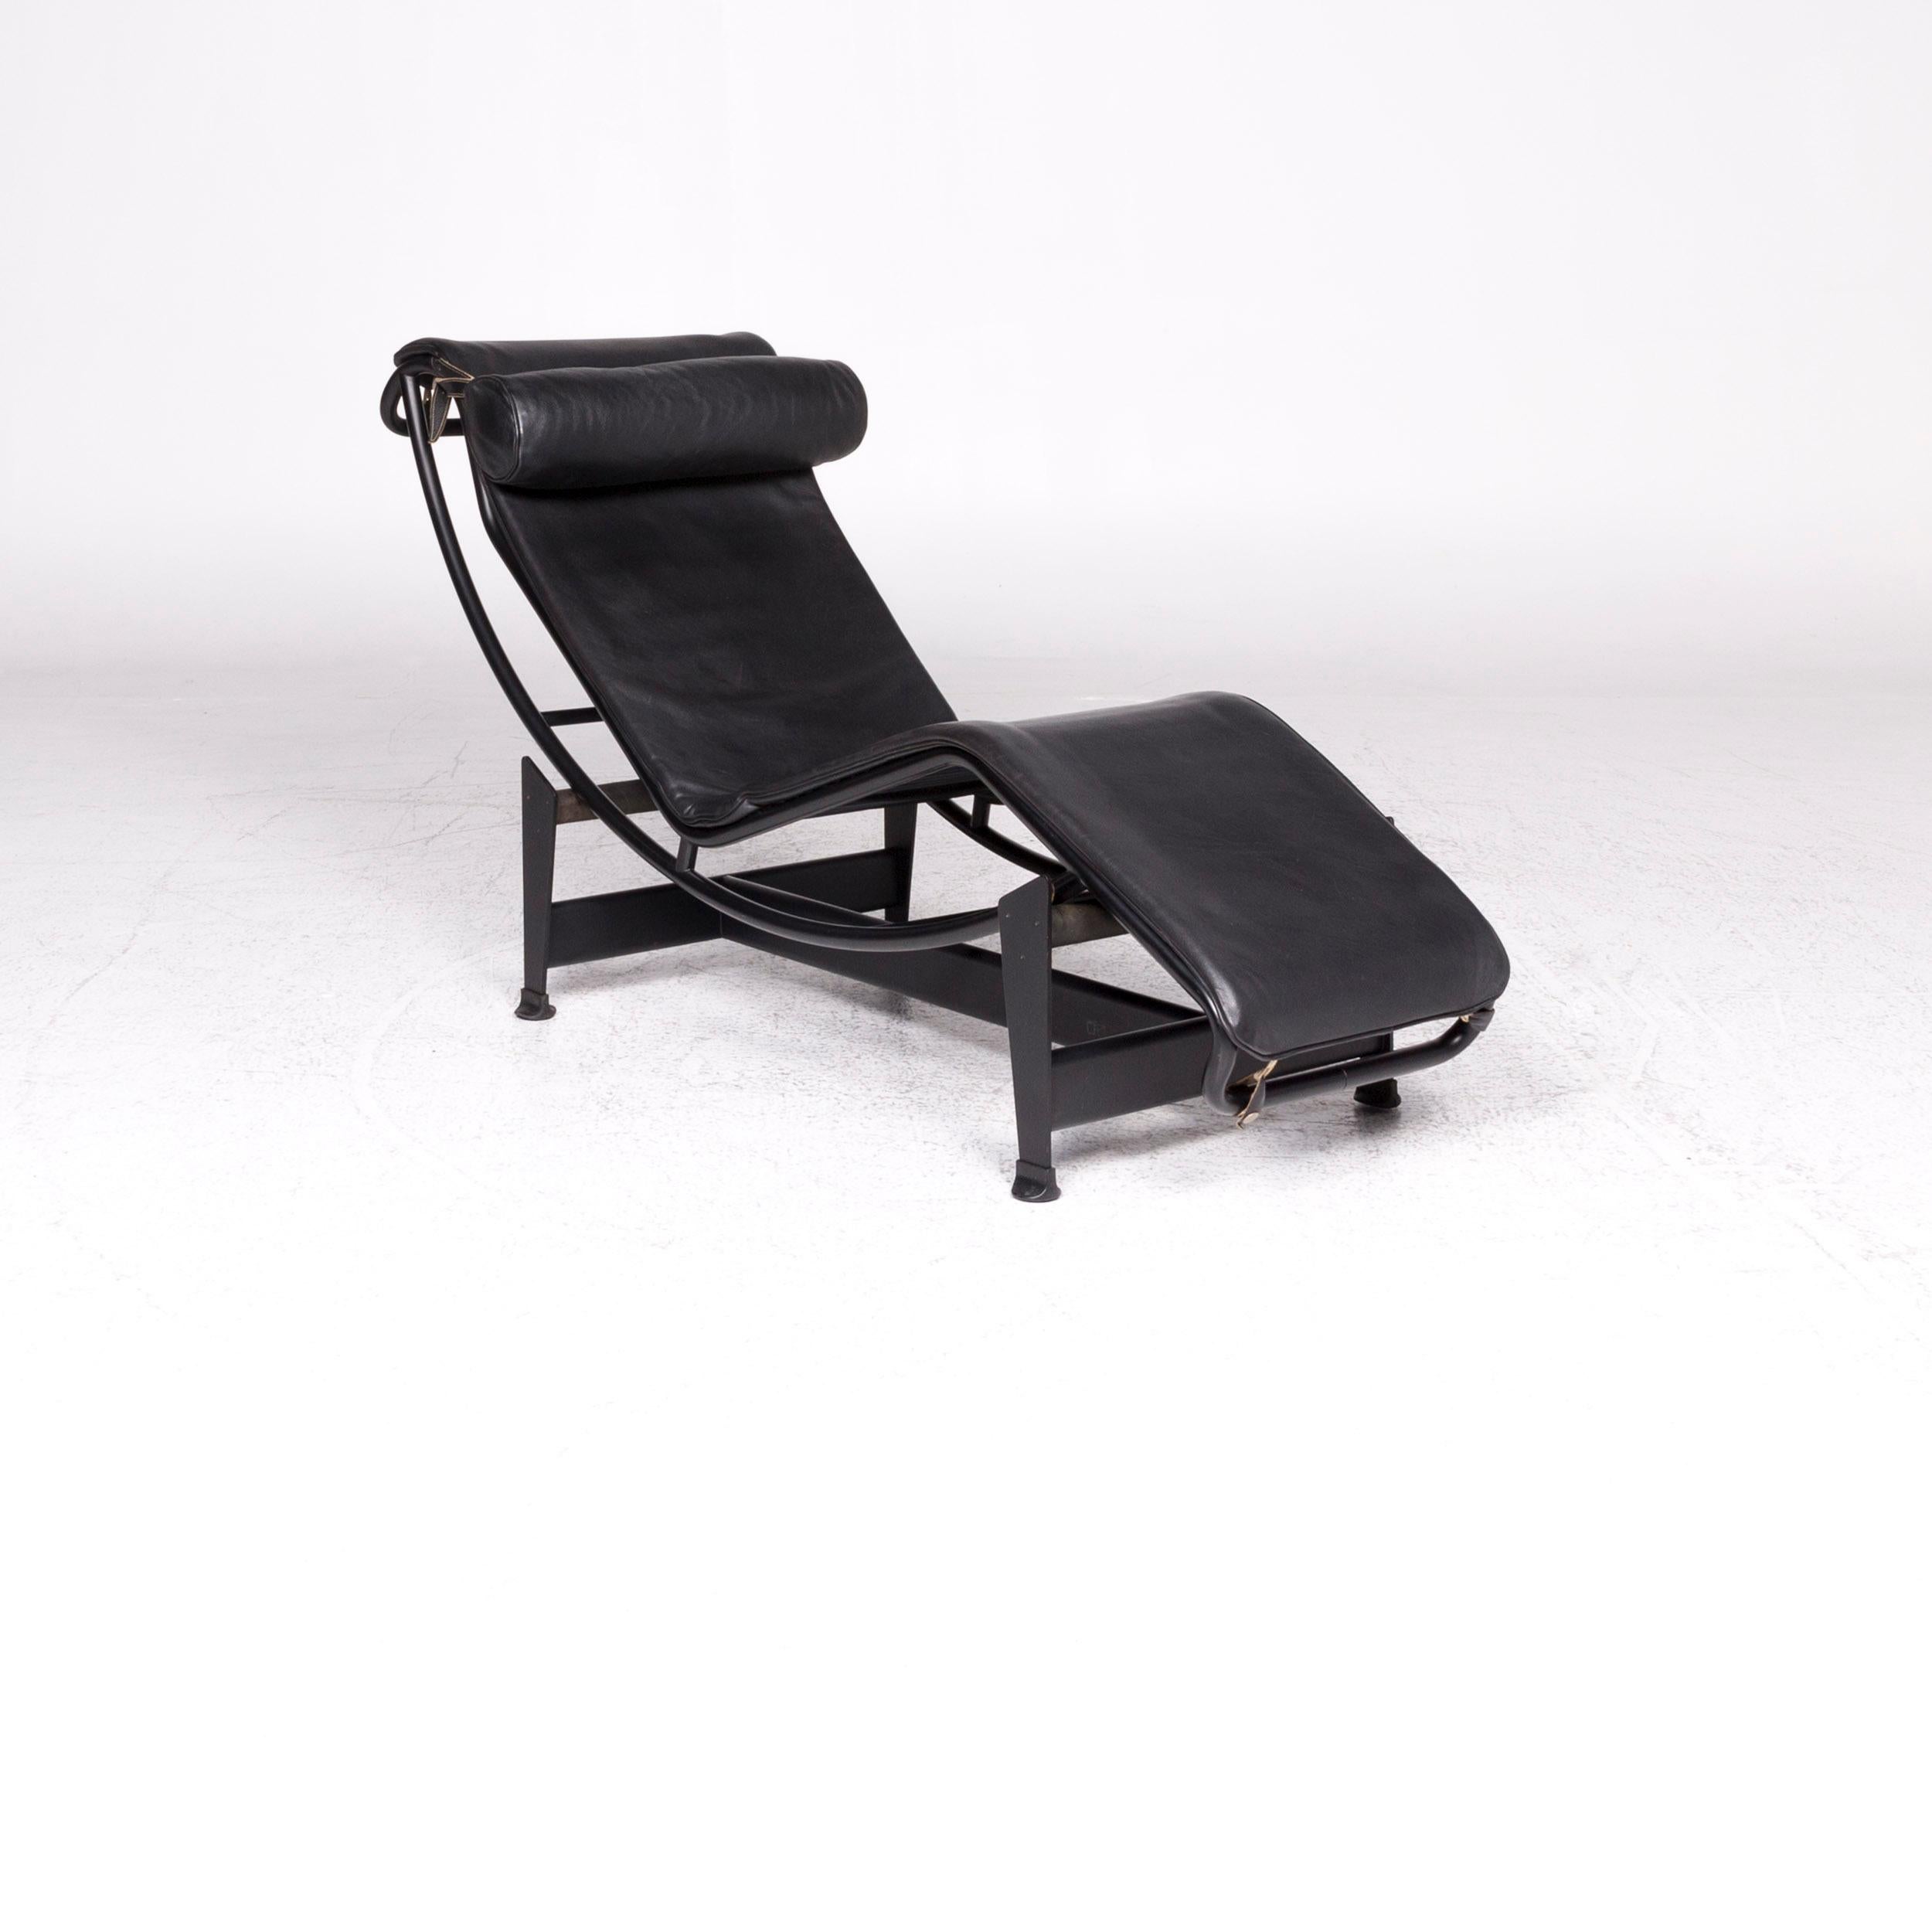 We bring to you a Cassina Le Corbusier LC 4 leather lounger black relax function.

 Product measurements in centimeters:
 
Depth: 152
Width: 59
Height: 85
Seat-height: 34
Rest-height:
Seat-depth: 52
Seat-width: 47
Back-height: 85.

 